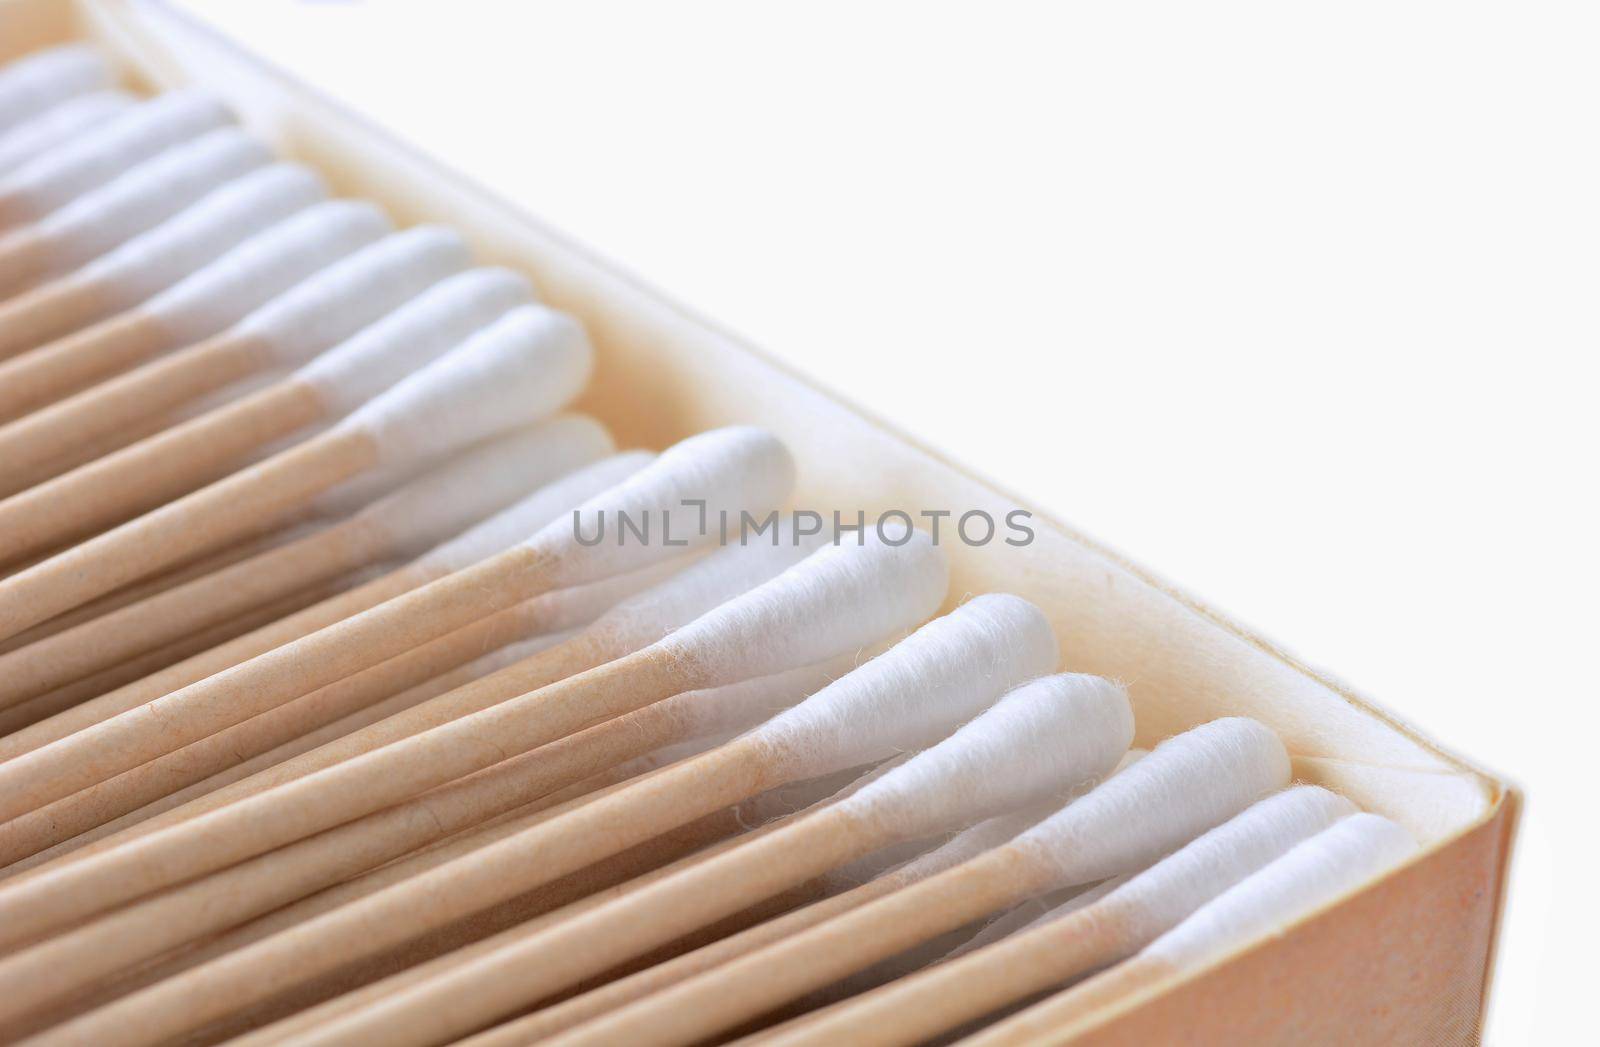 Box full of ecological paper cotton swabs on white background by hamik